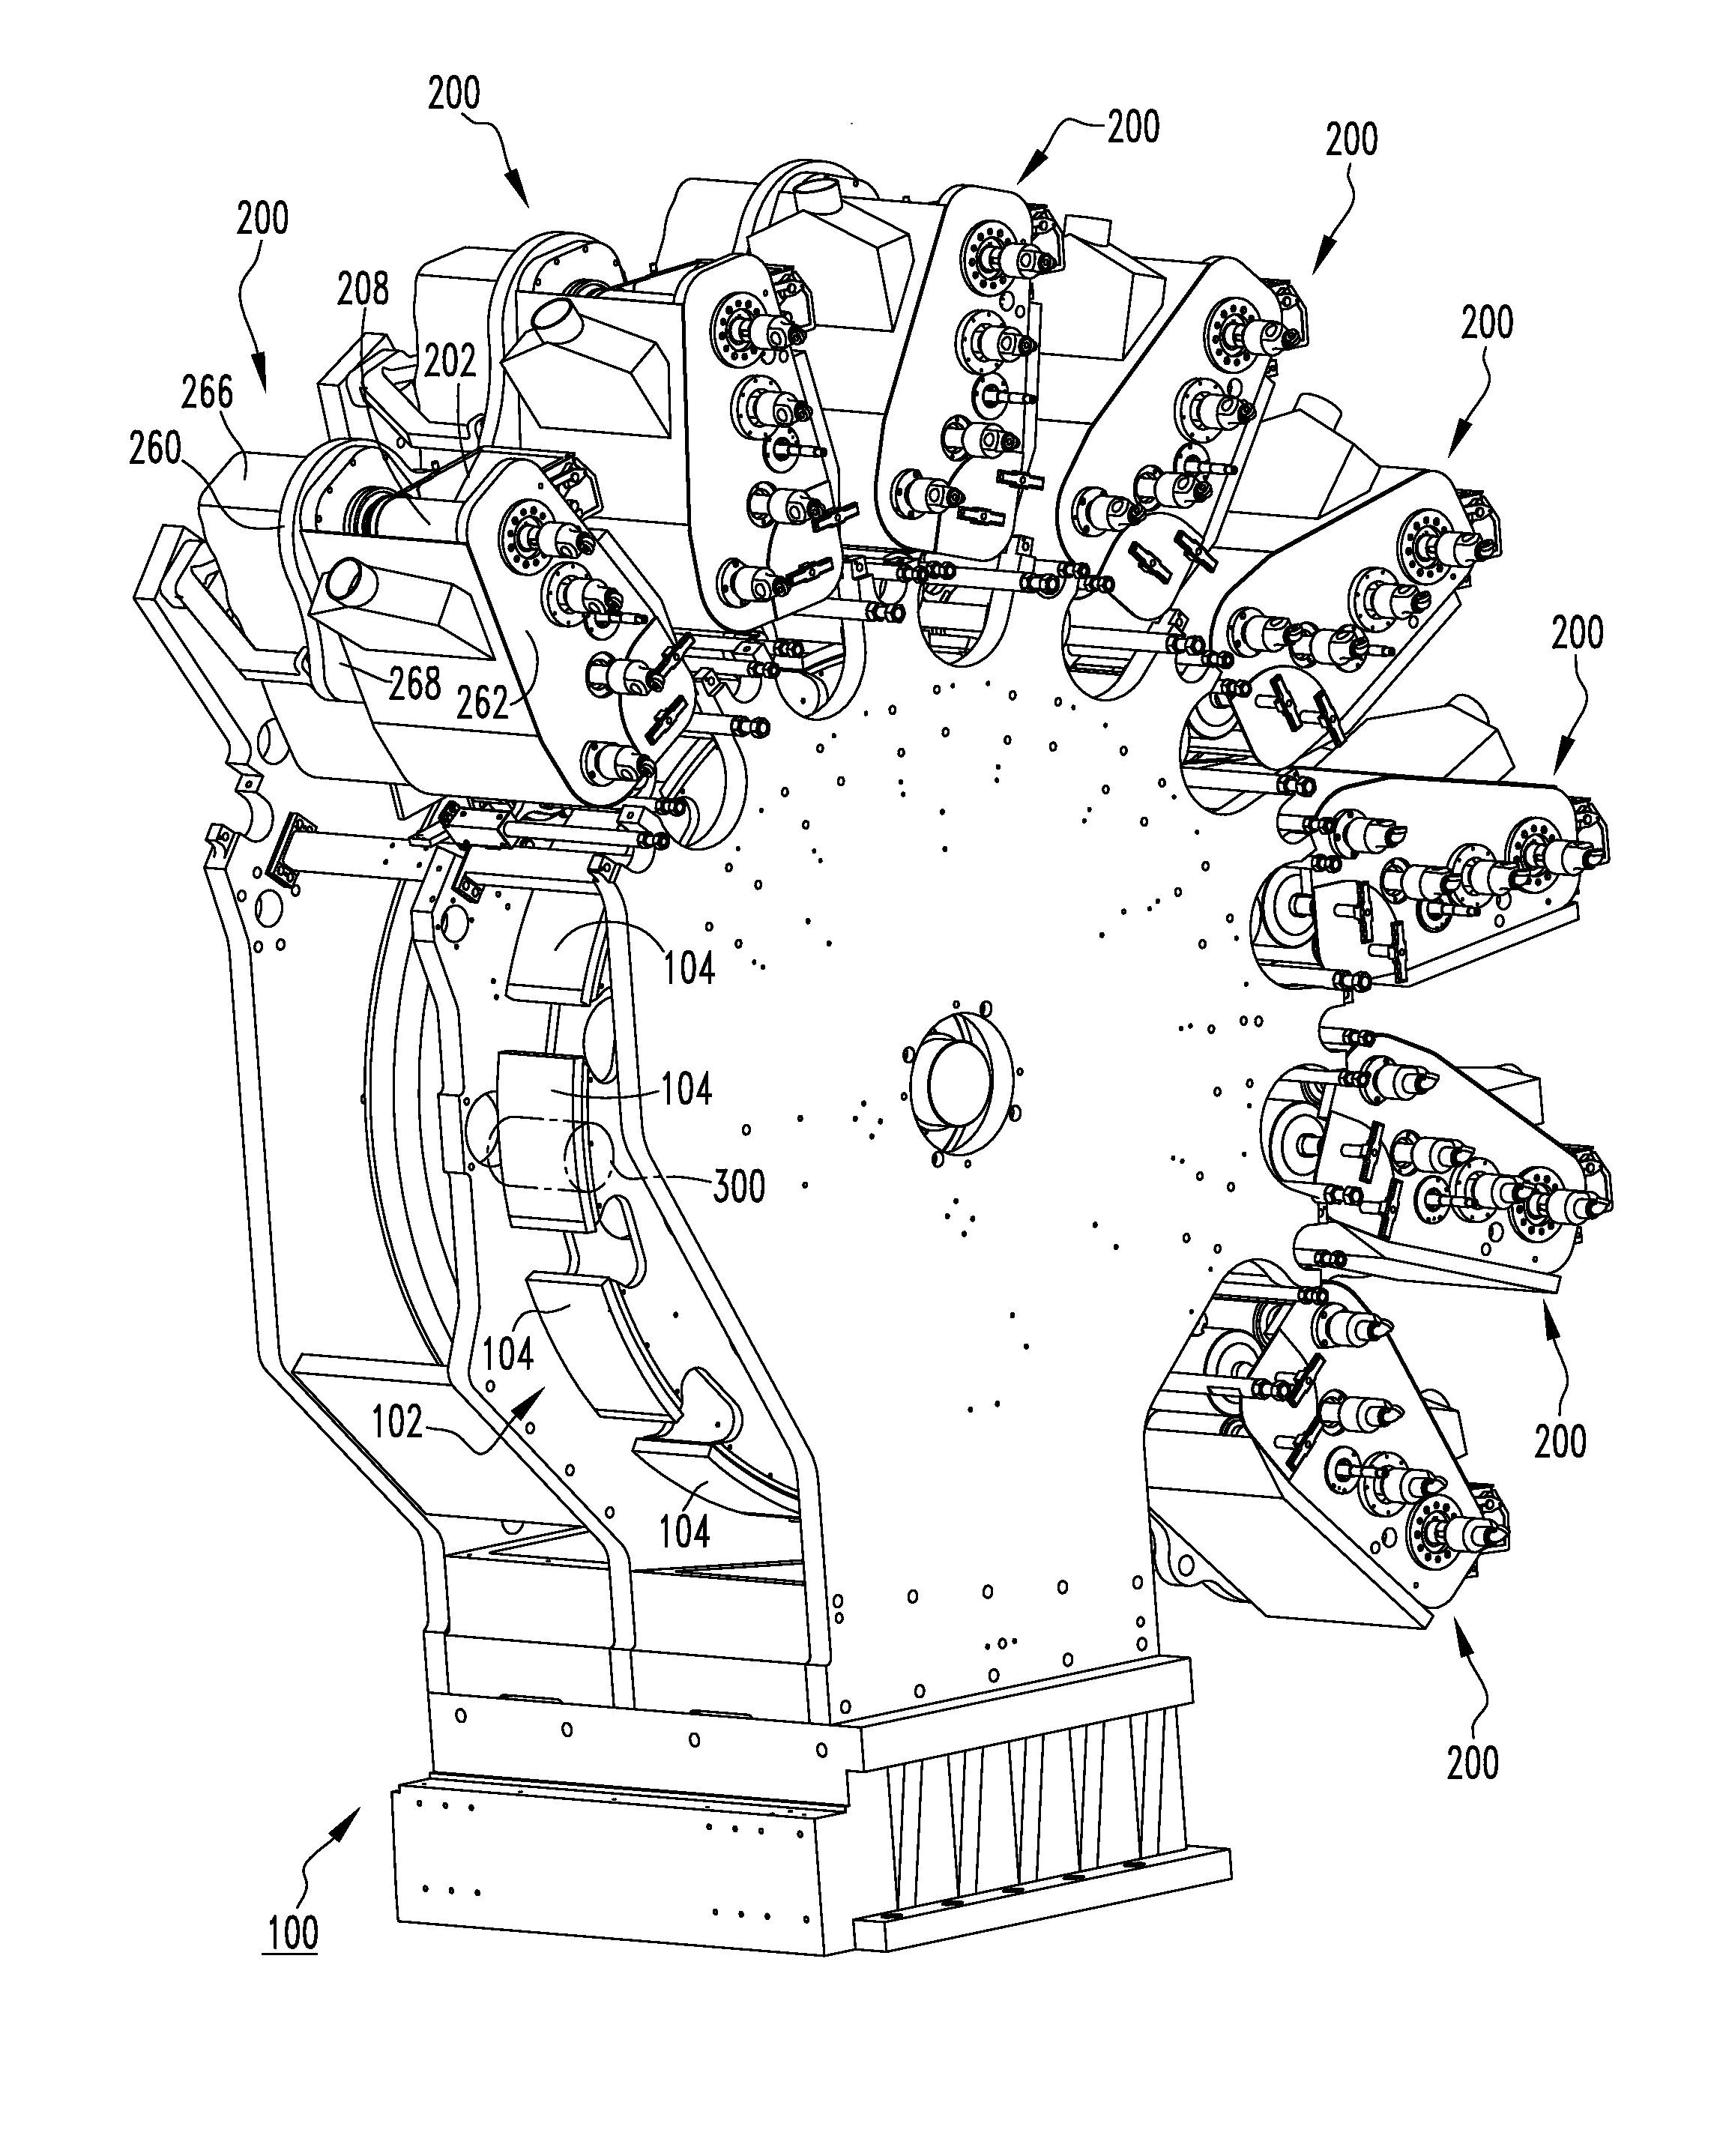 Can decorator machine, ink station assembly therefor, and can decorating method employing same